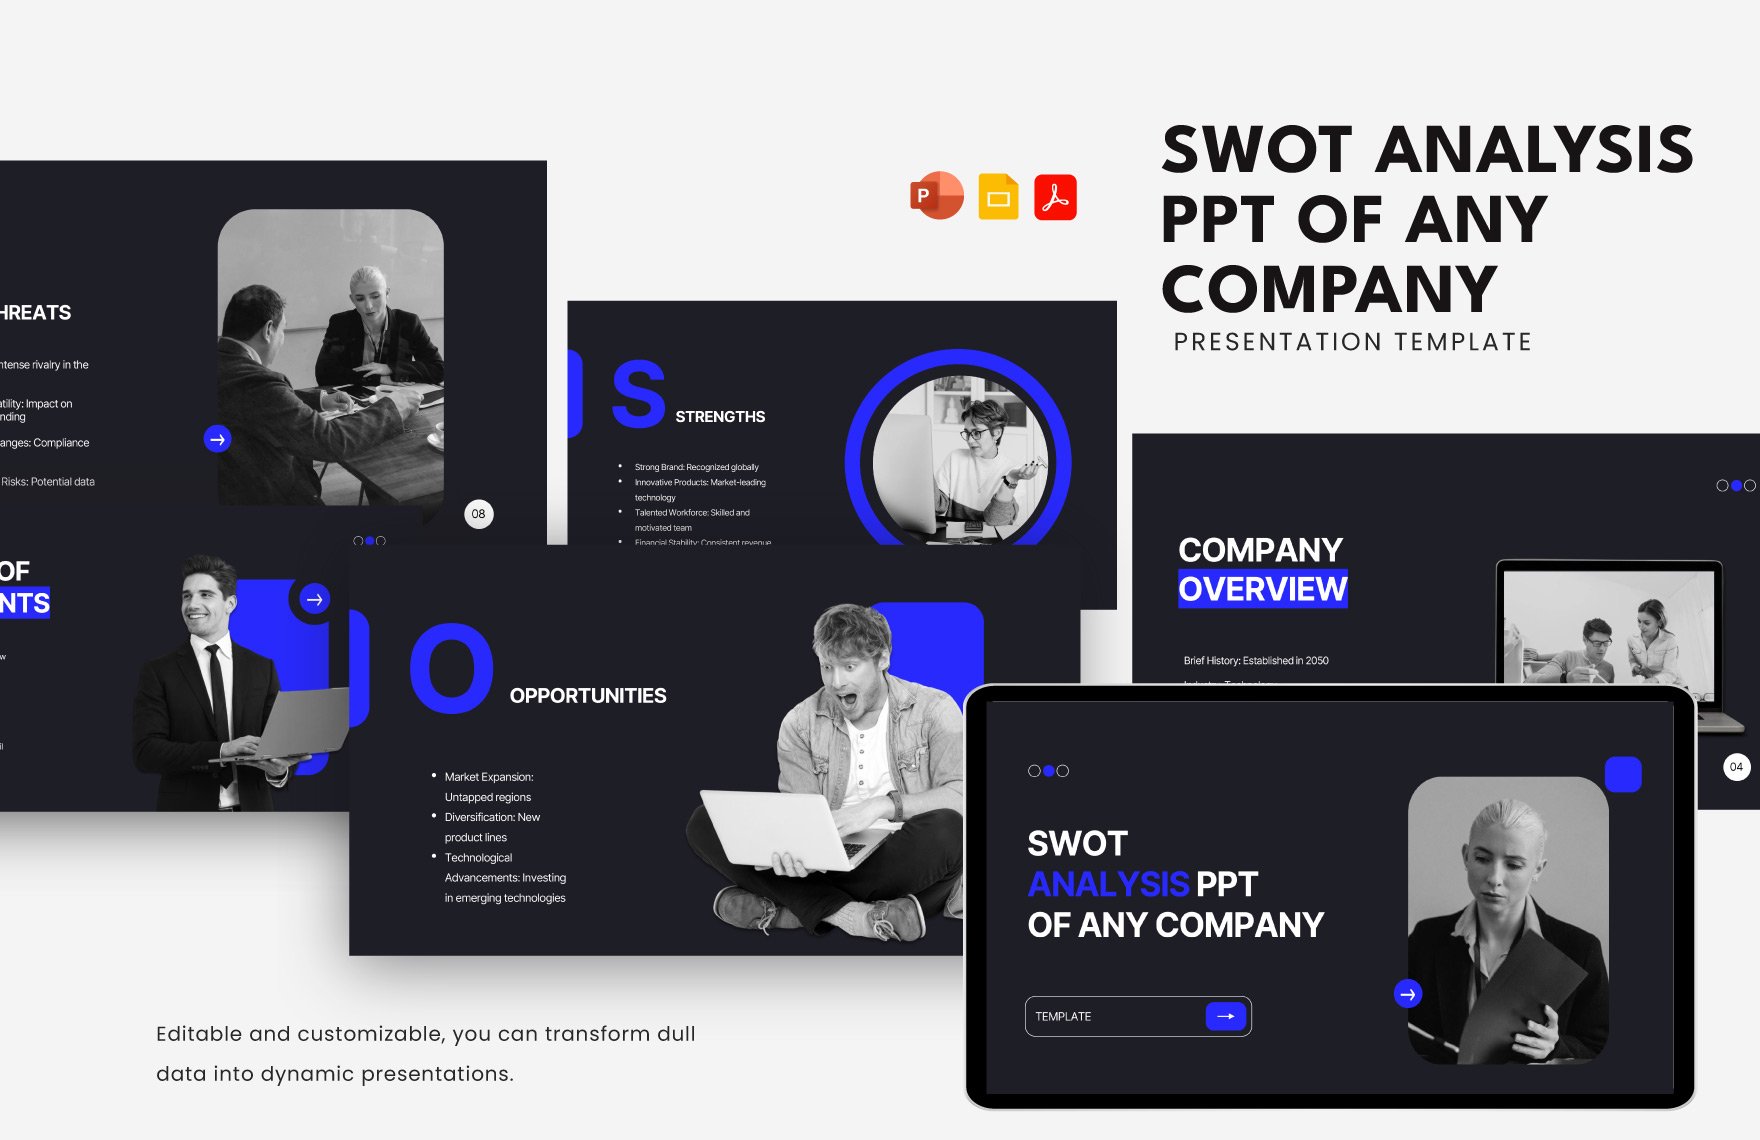 SWOT Analysis PPT of any Company Template